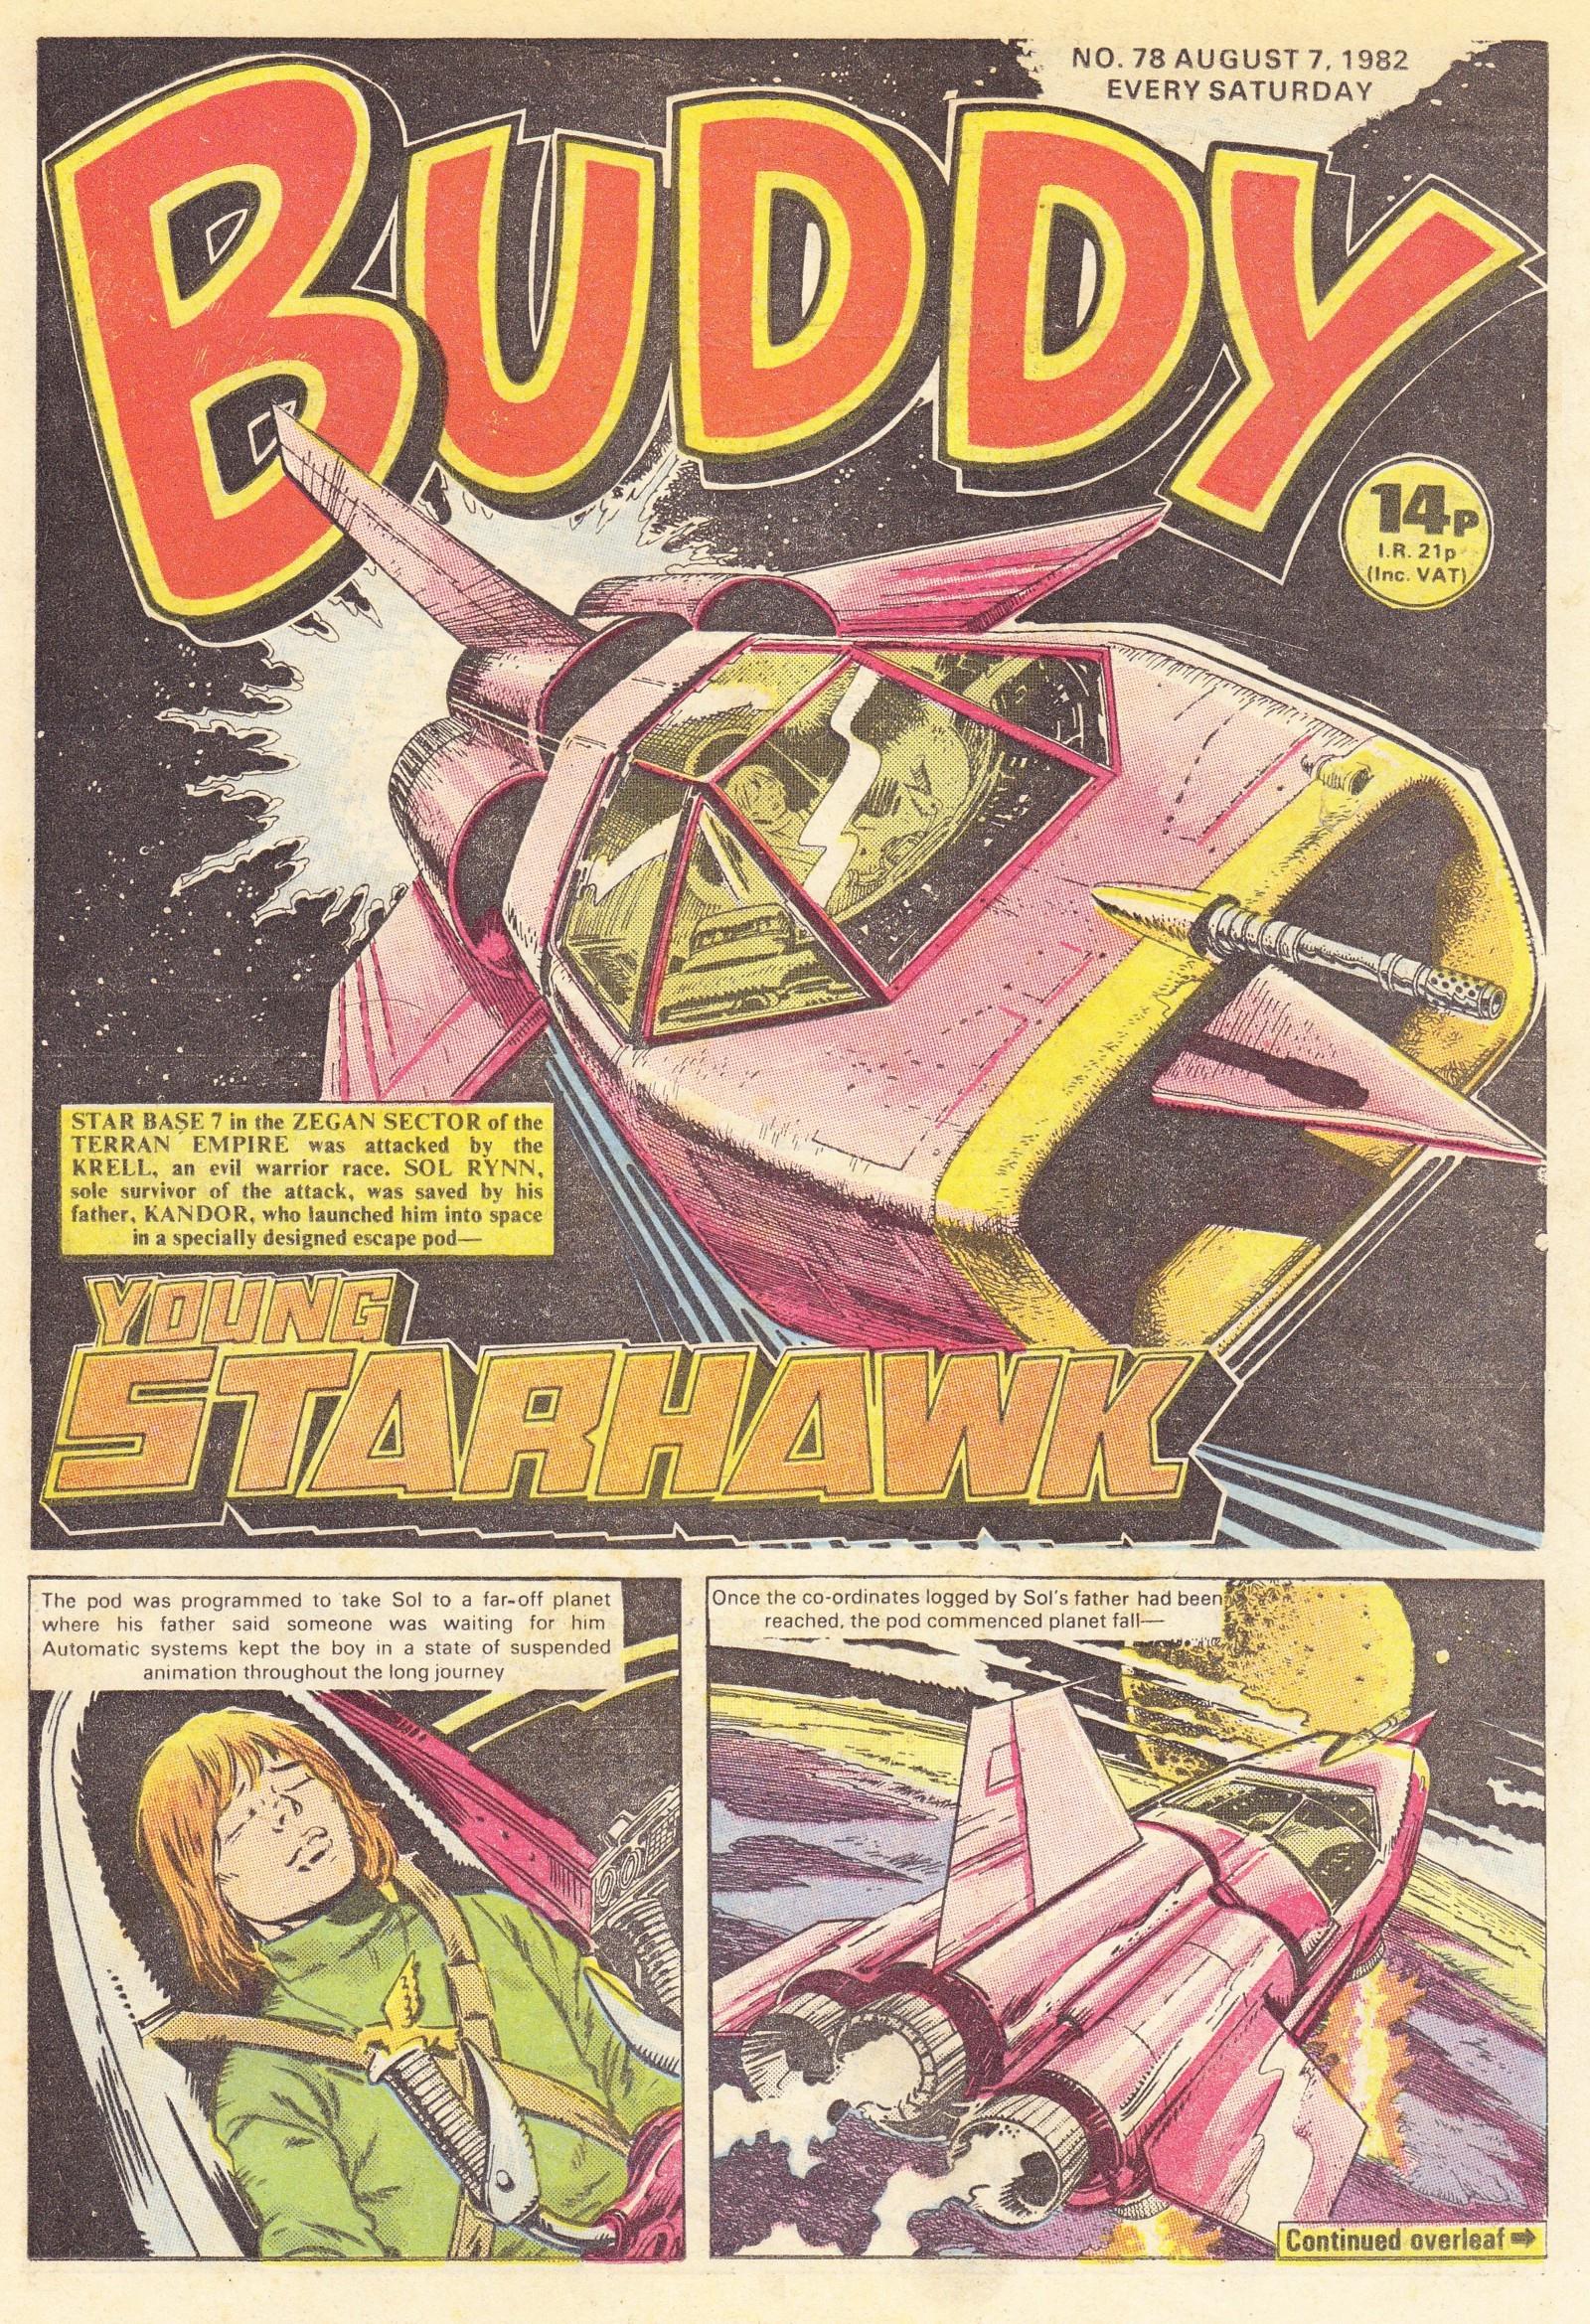 Read online Buddy comic -  Issue #78 - 1